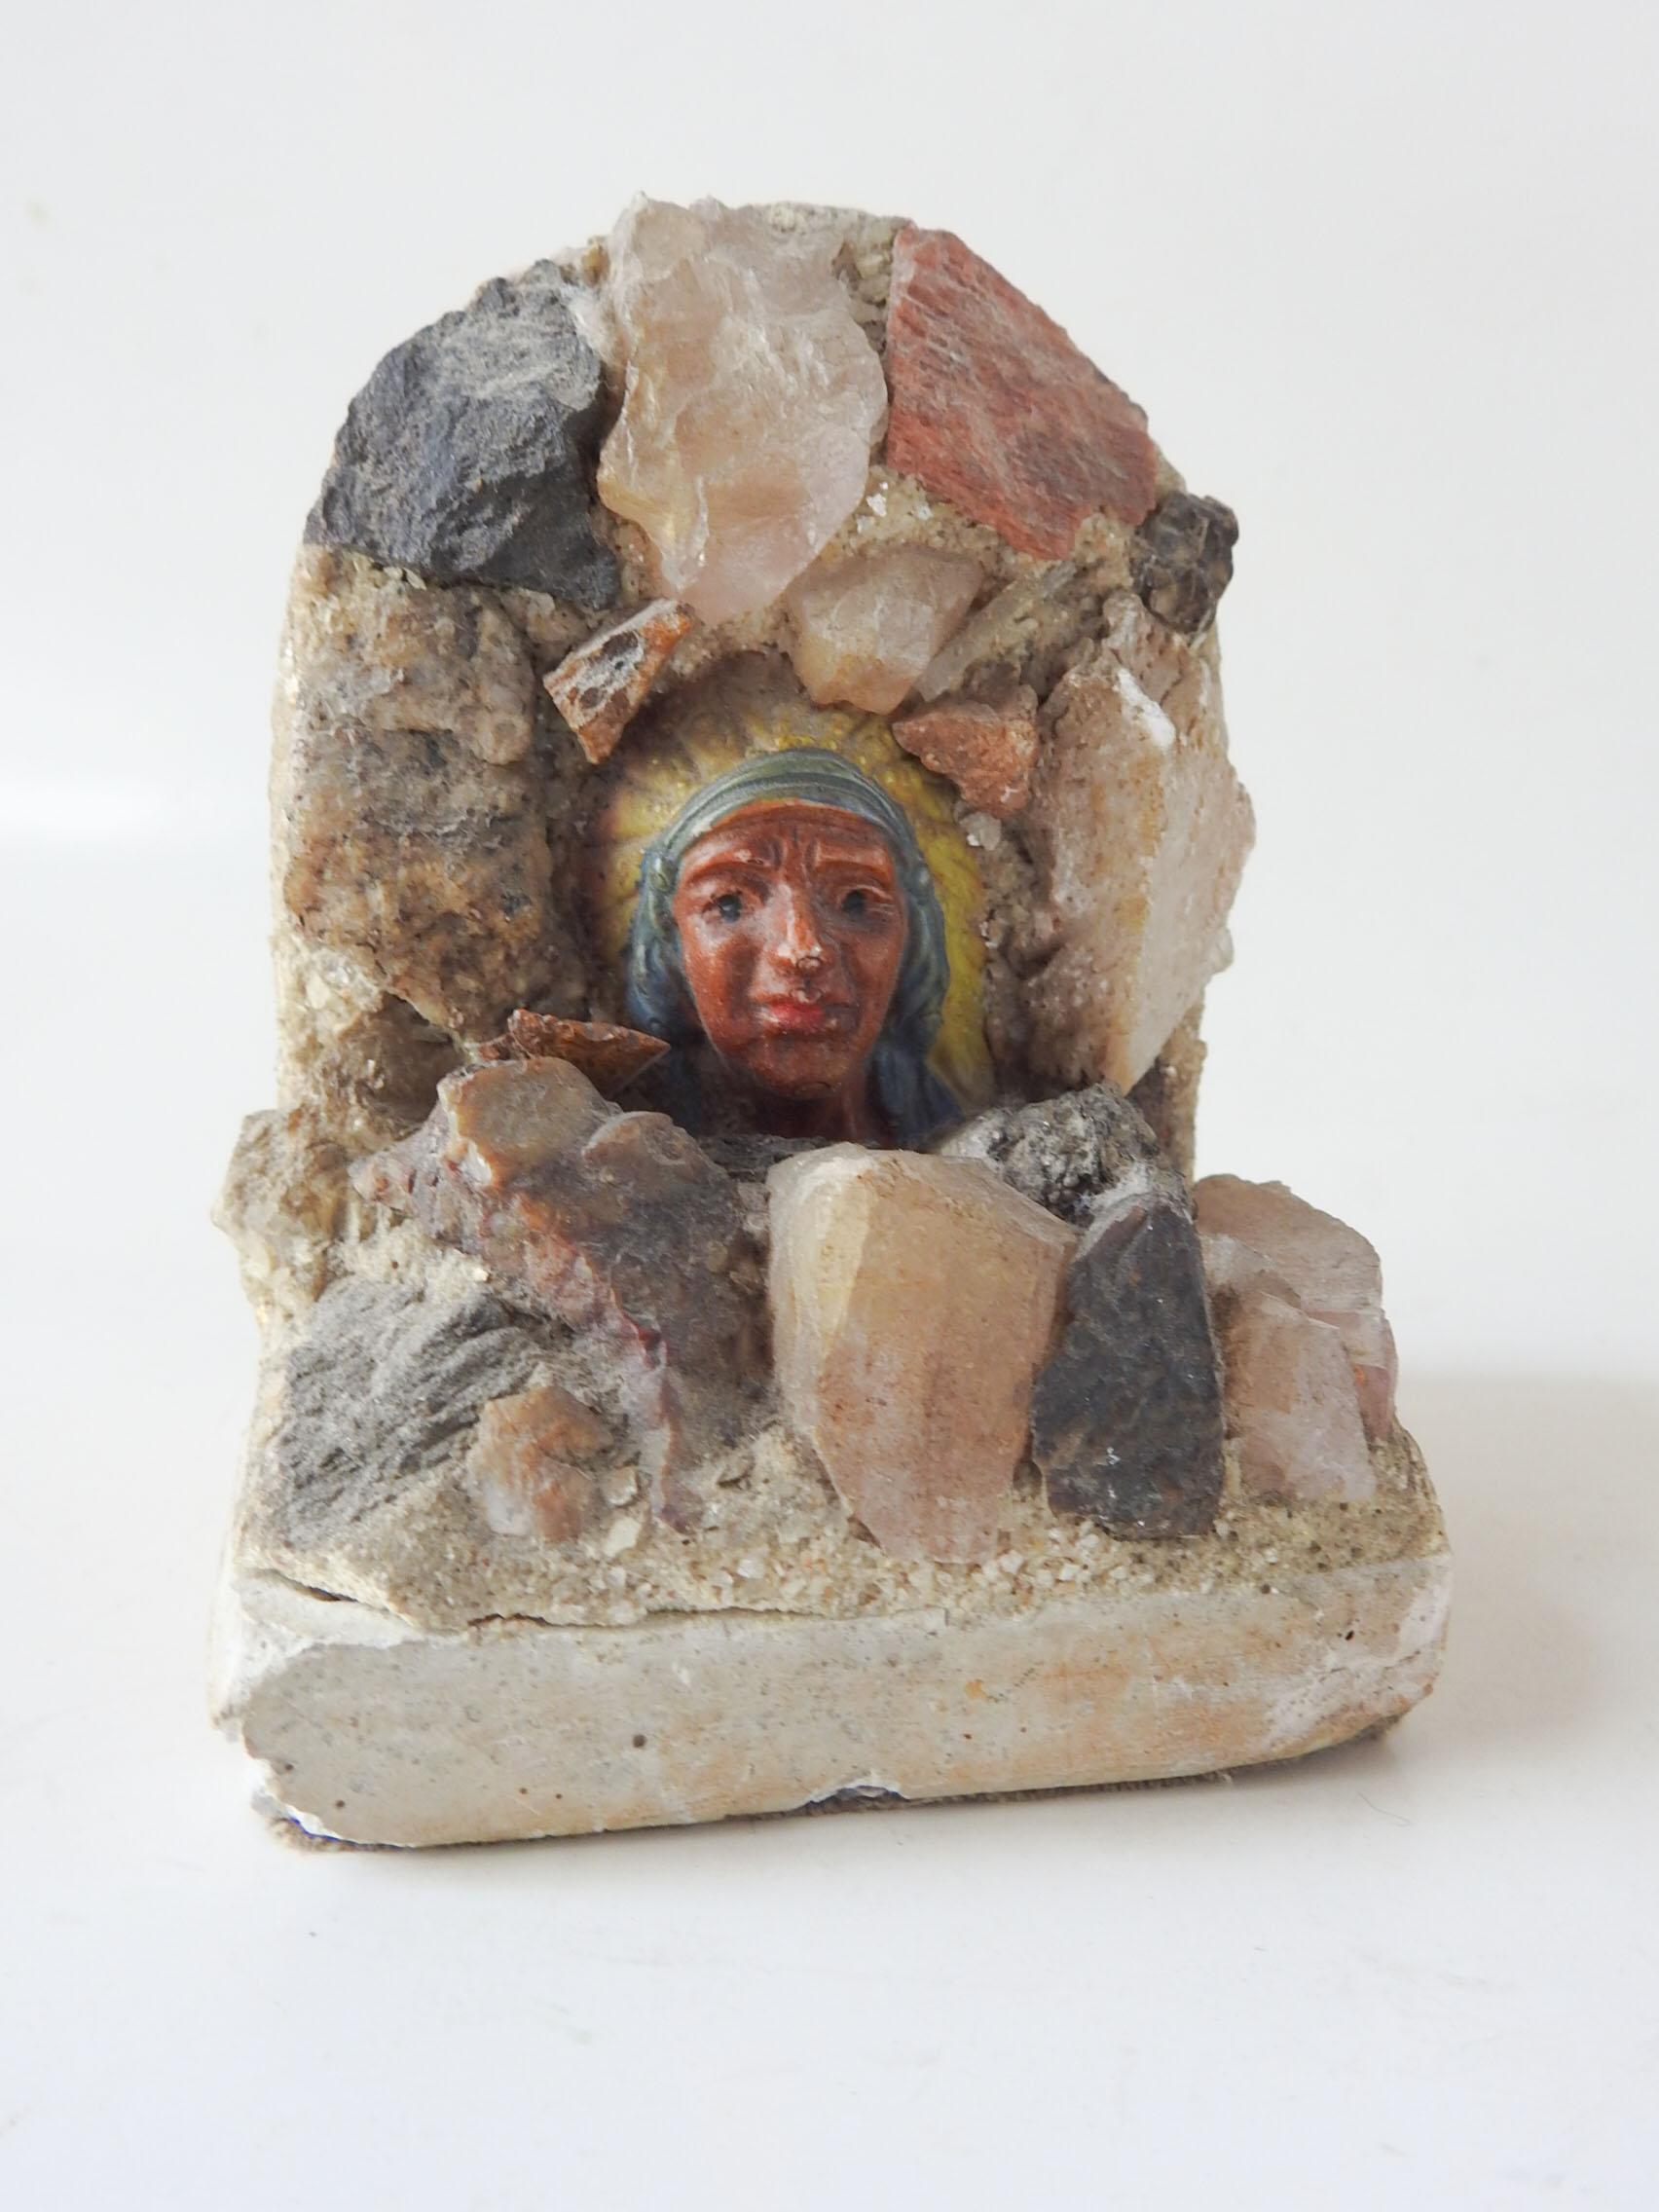 Vintage circa 1930's handmade rock and quartz bookends. A souvenir of the Black Hills, South Dakota. Made of hard plaster with Native American bust figure, rose quartz, petrified wood, mica and other various stones, felt on bottom. Overall wear,